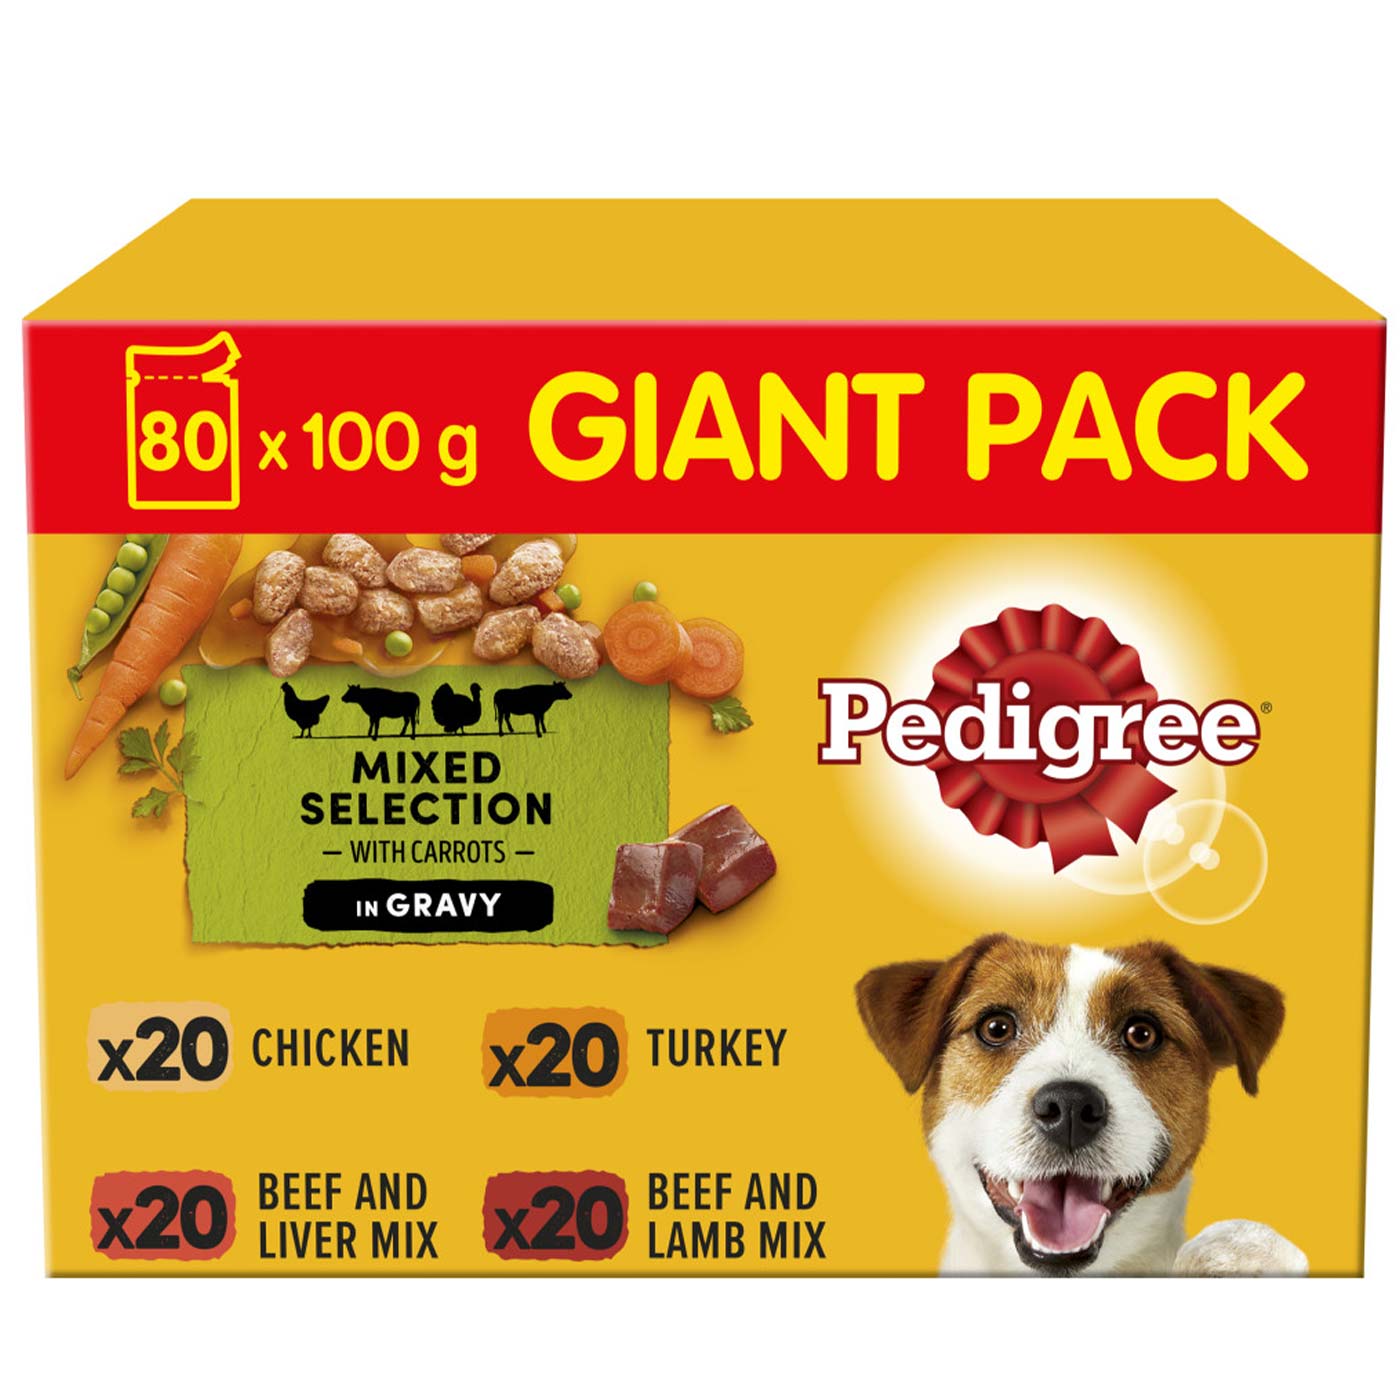 Pedigree Adult Dog Pouches Mixed Selection in Gravy XL Mega Pack (80x100g)